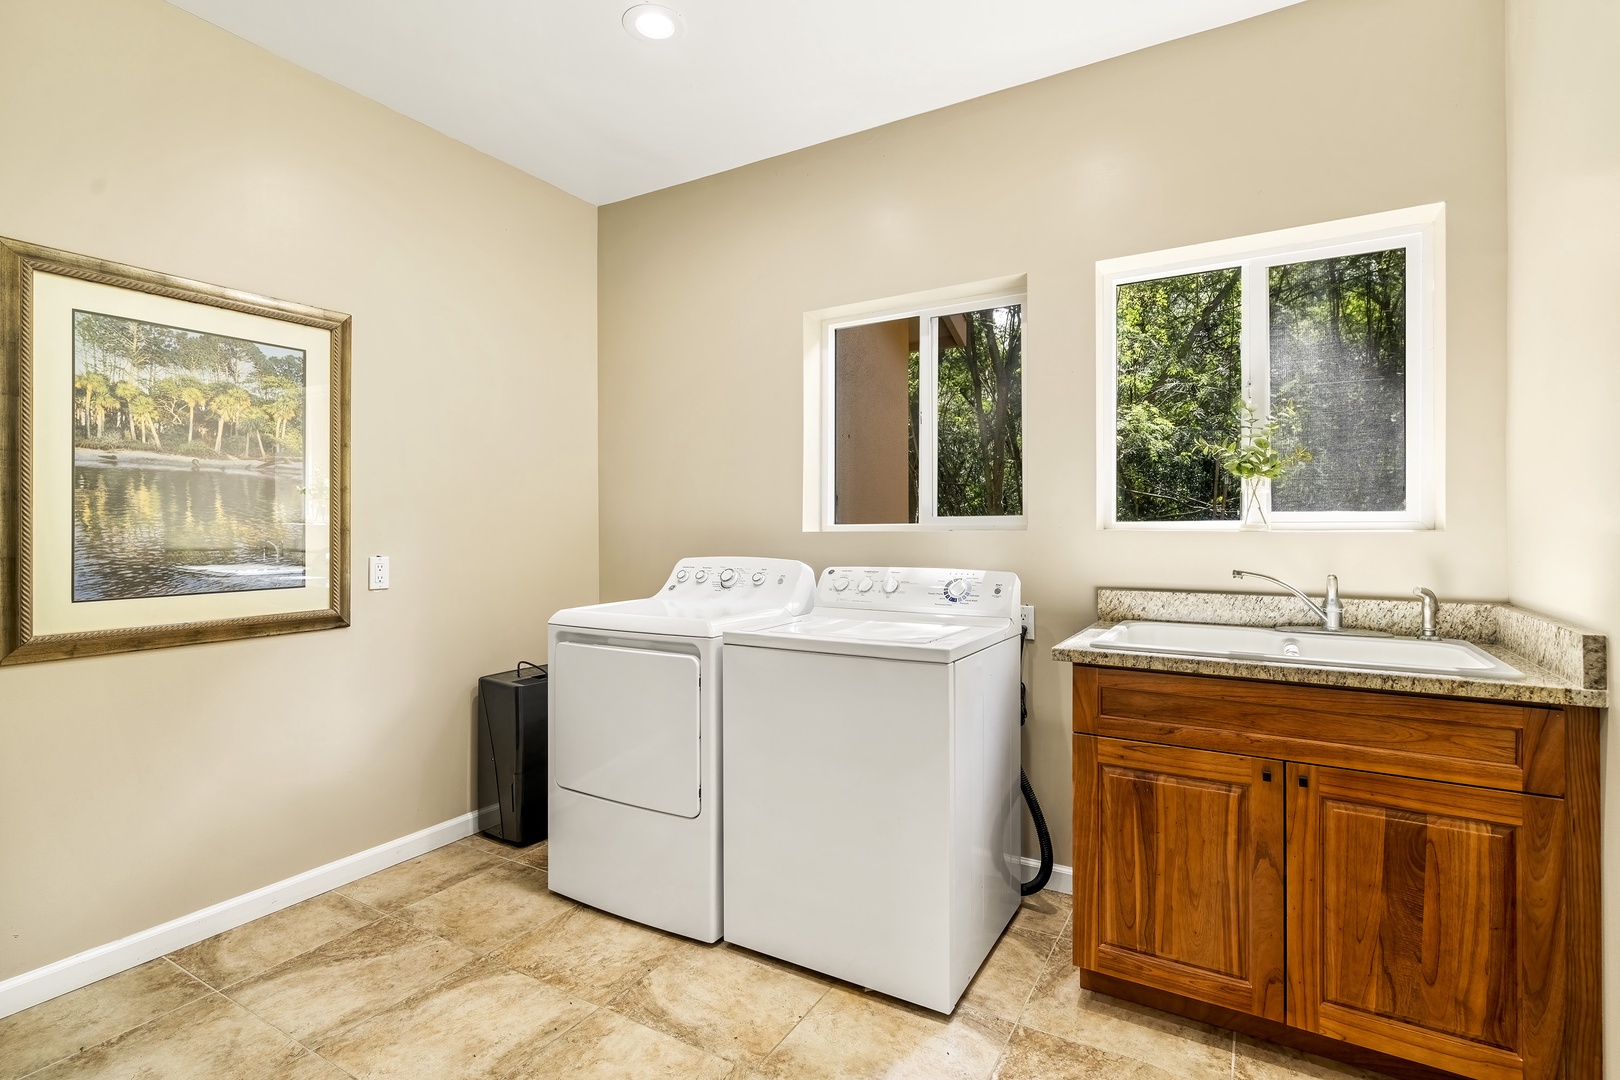 Kailua Kona Vacation Rentals, Lymans Bay Hale - Full sized laundry room with washer, dryer and large sink